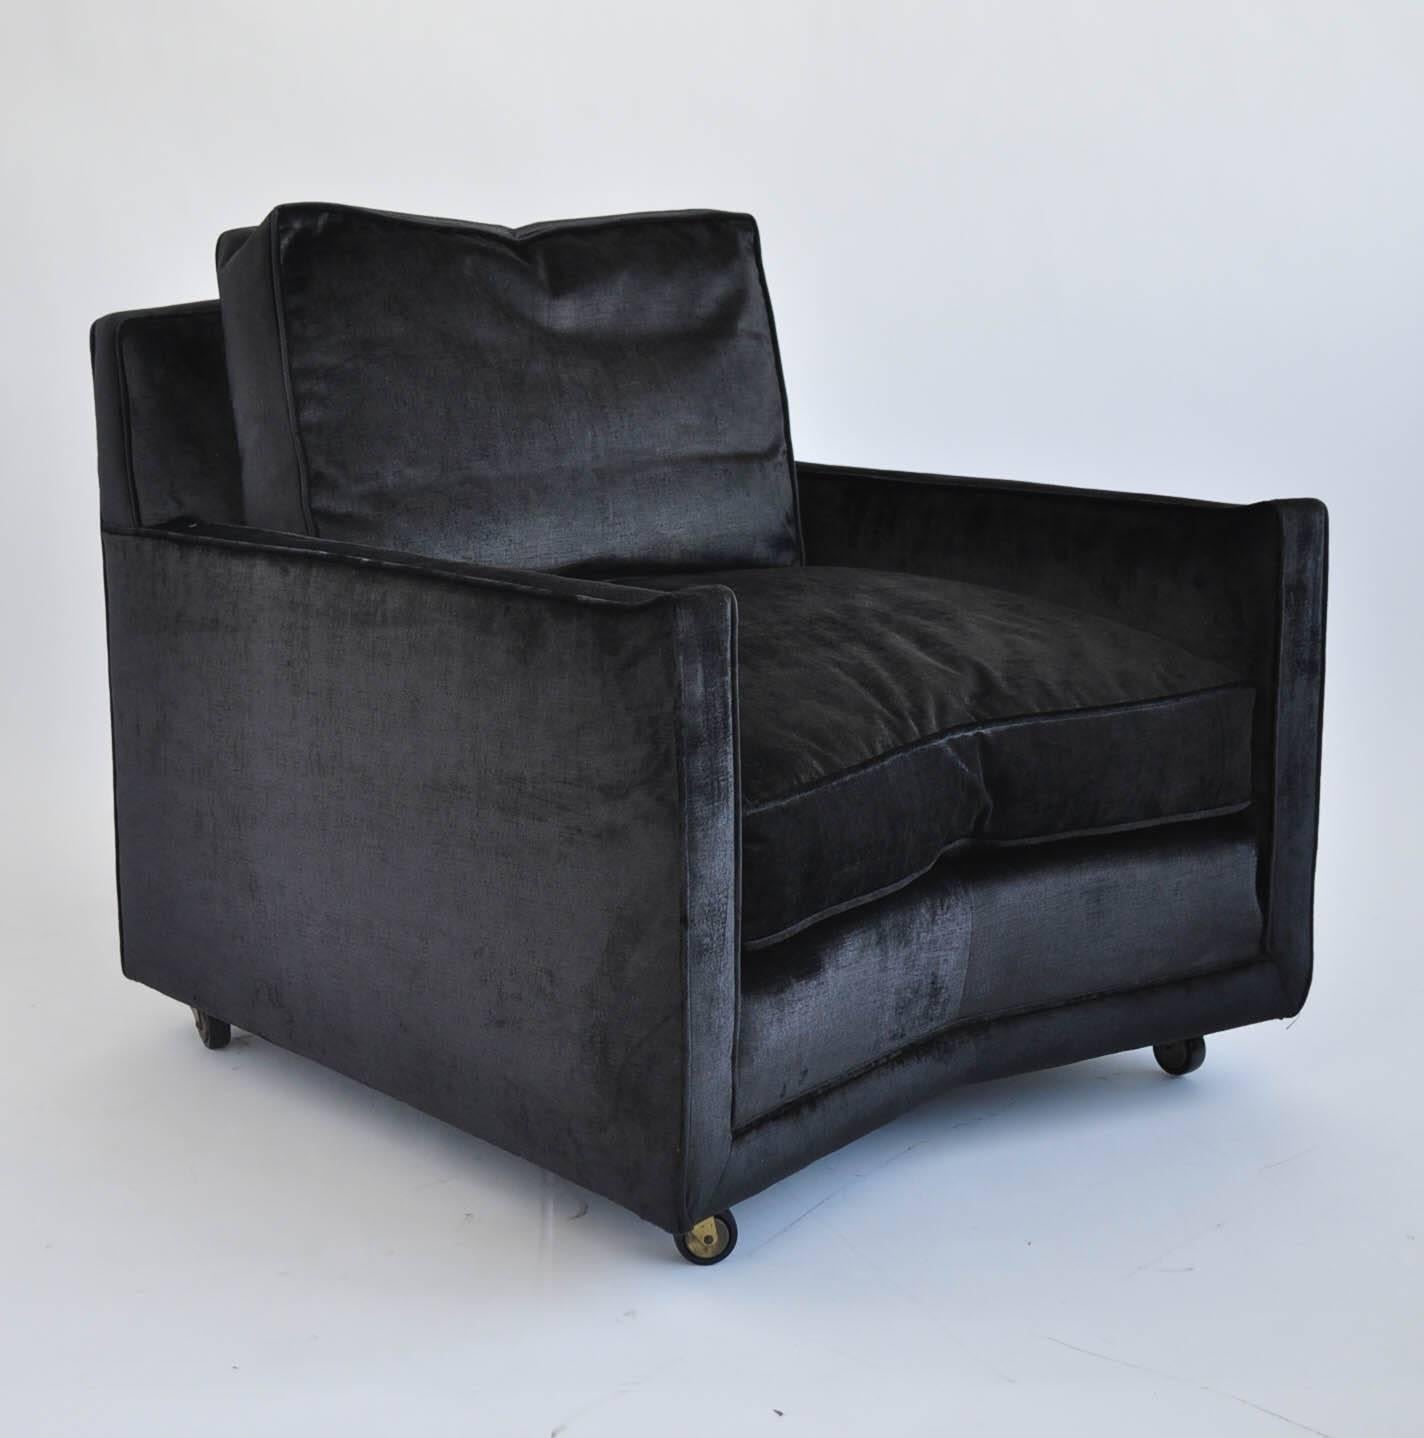 Lounge chair and ottoman by Baker Furniture company features down filling on both the chair and ottoman. The ottoman and chair sit on brass castors. 

Chair dimensions: 38